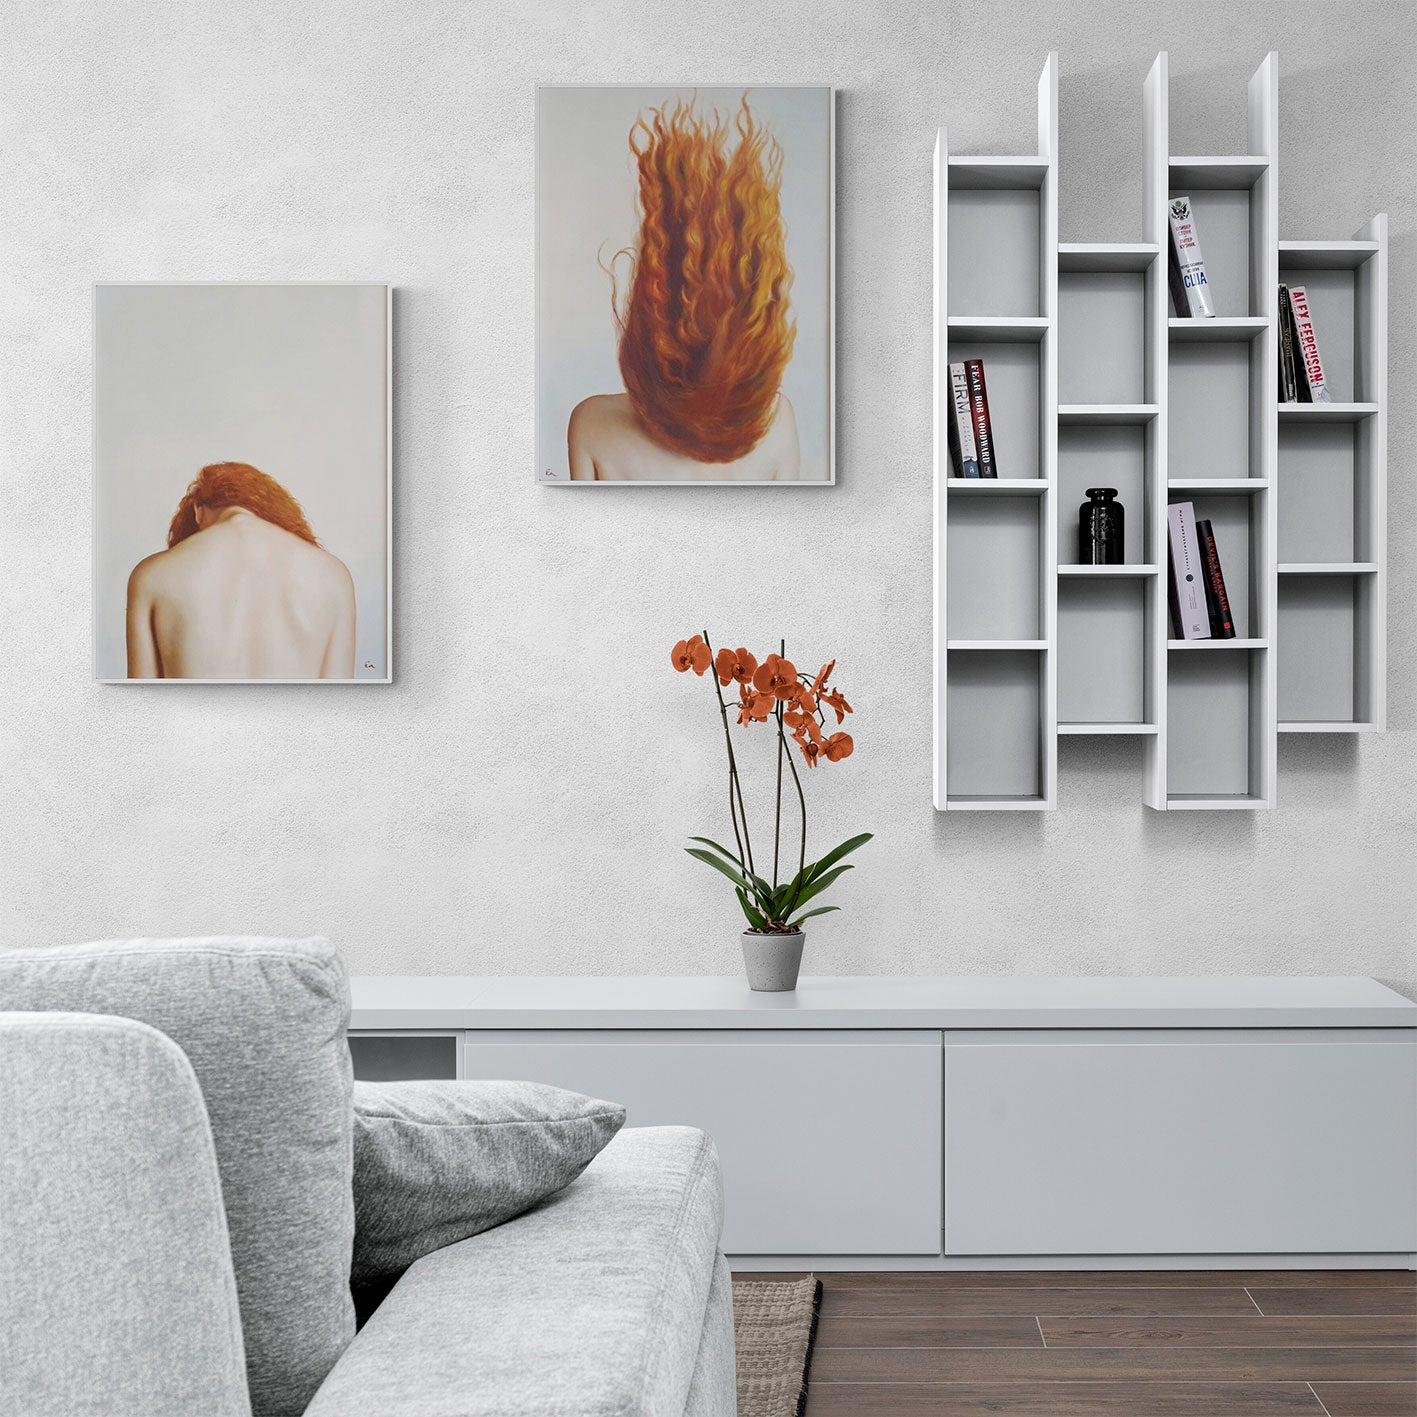 Redhead Diptych Painting 60x80 cm [2 Pieces]